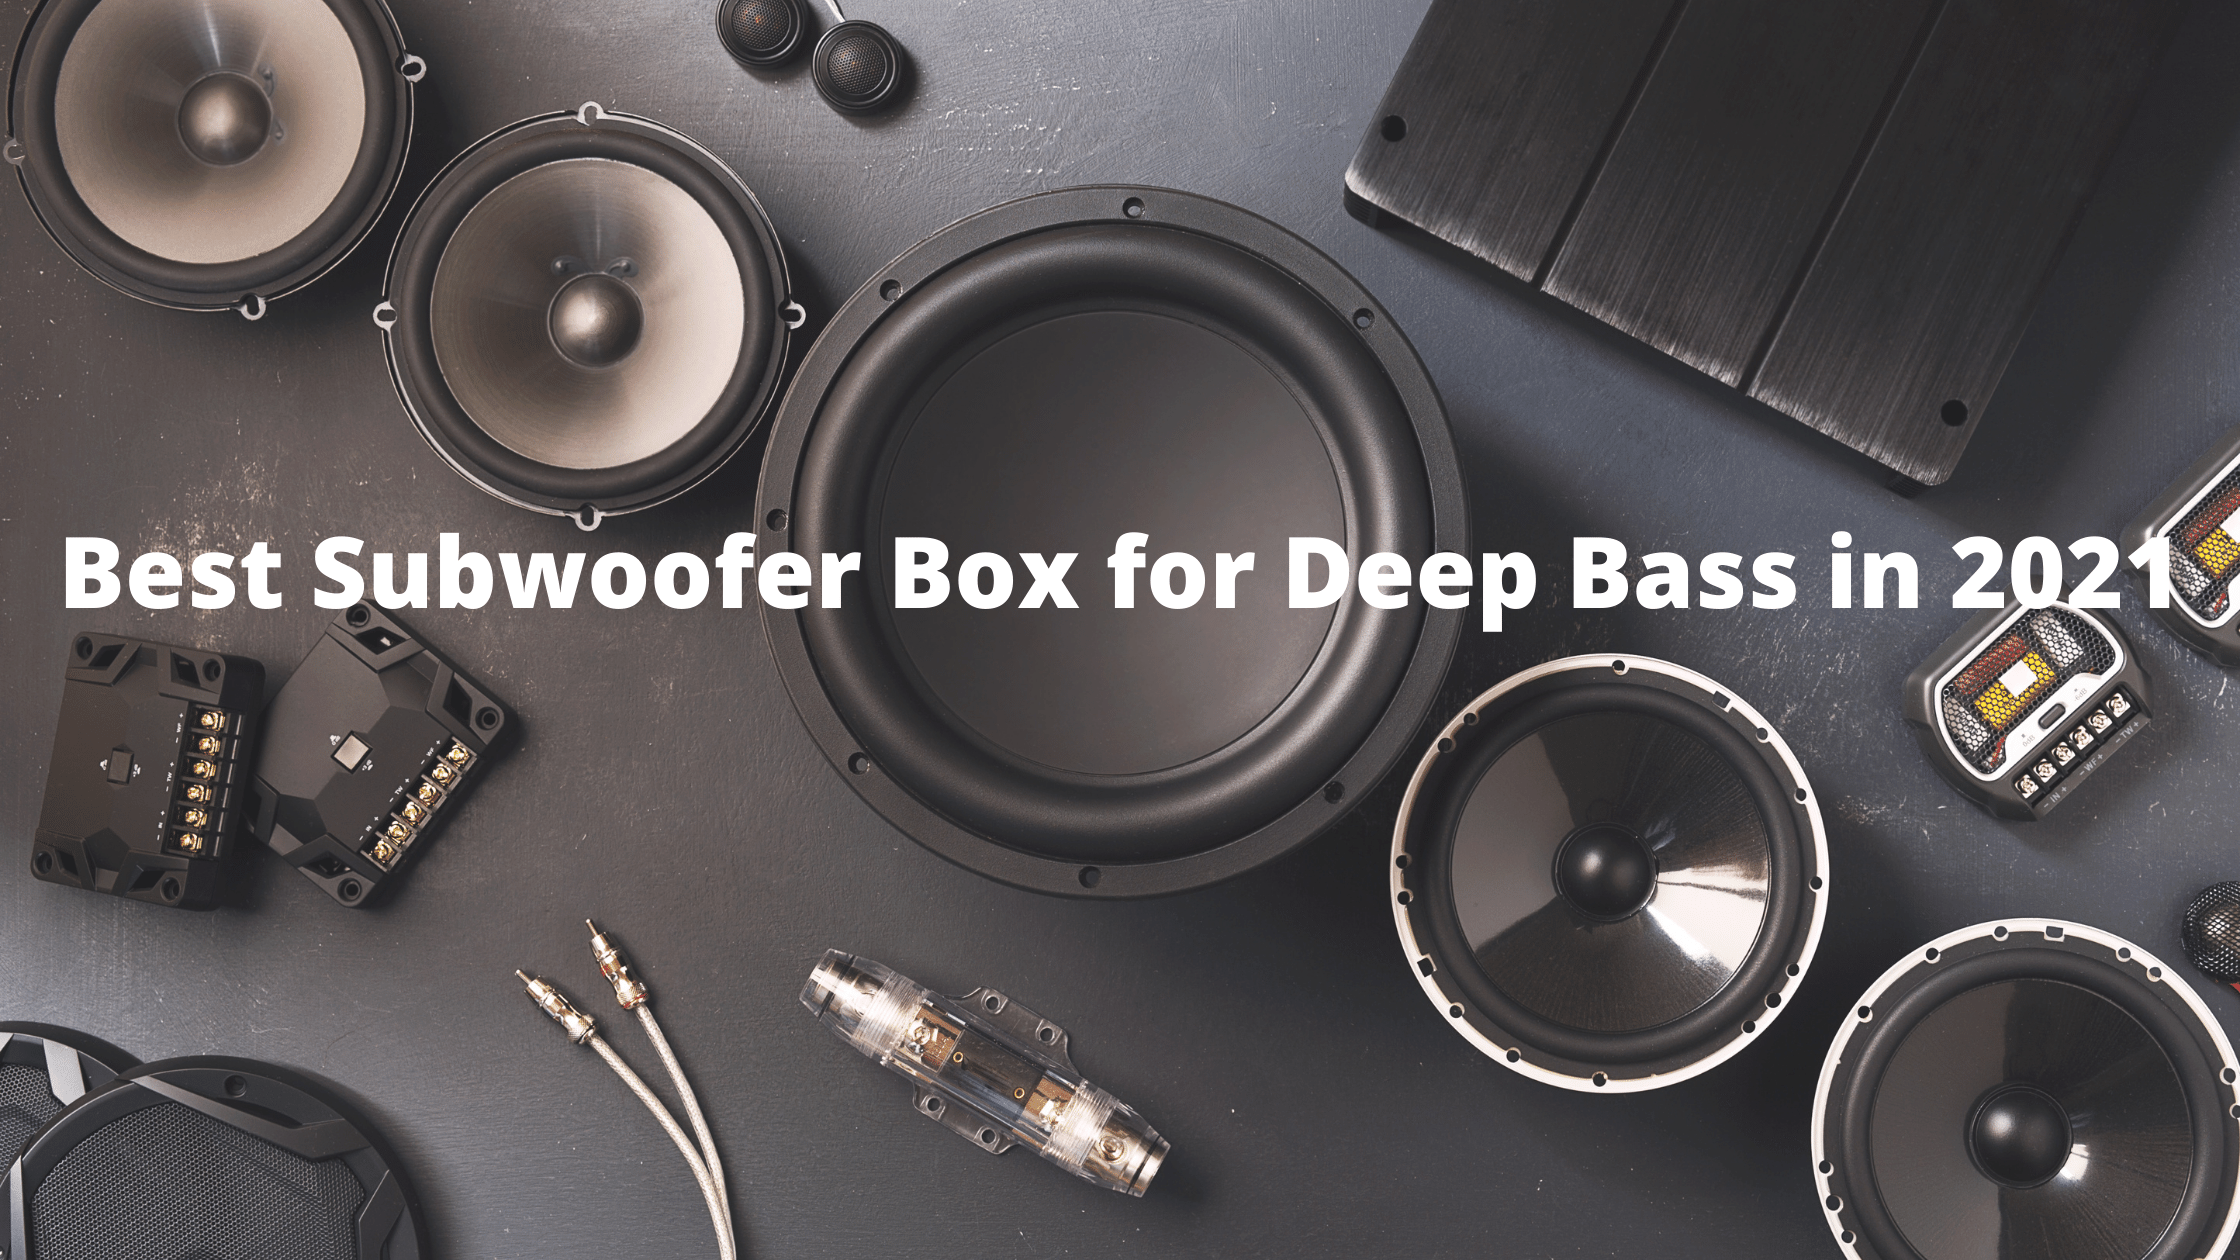 Best Subwoofer Box for Deep Bass in 2021